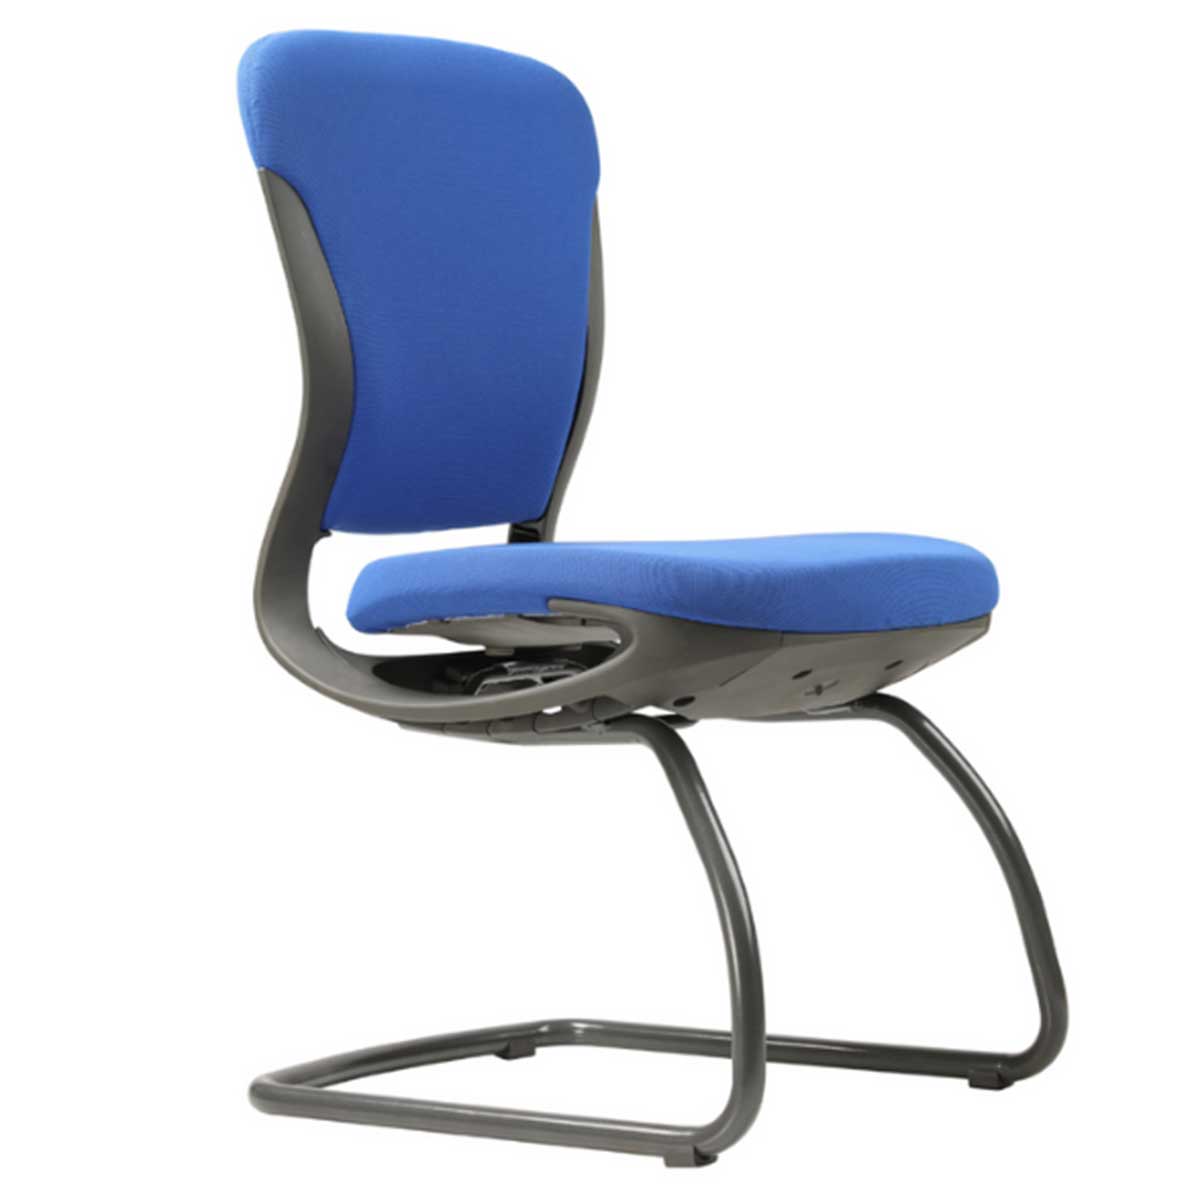 Collaborative chair Manufacturers, Suppliers, Exporters in Delhi 